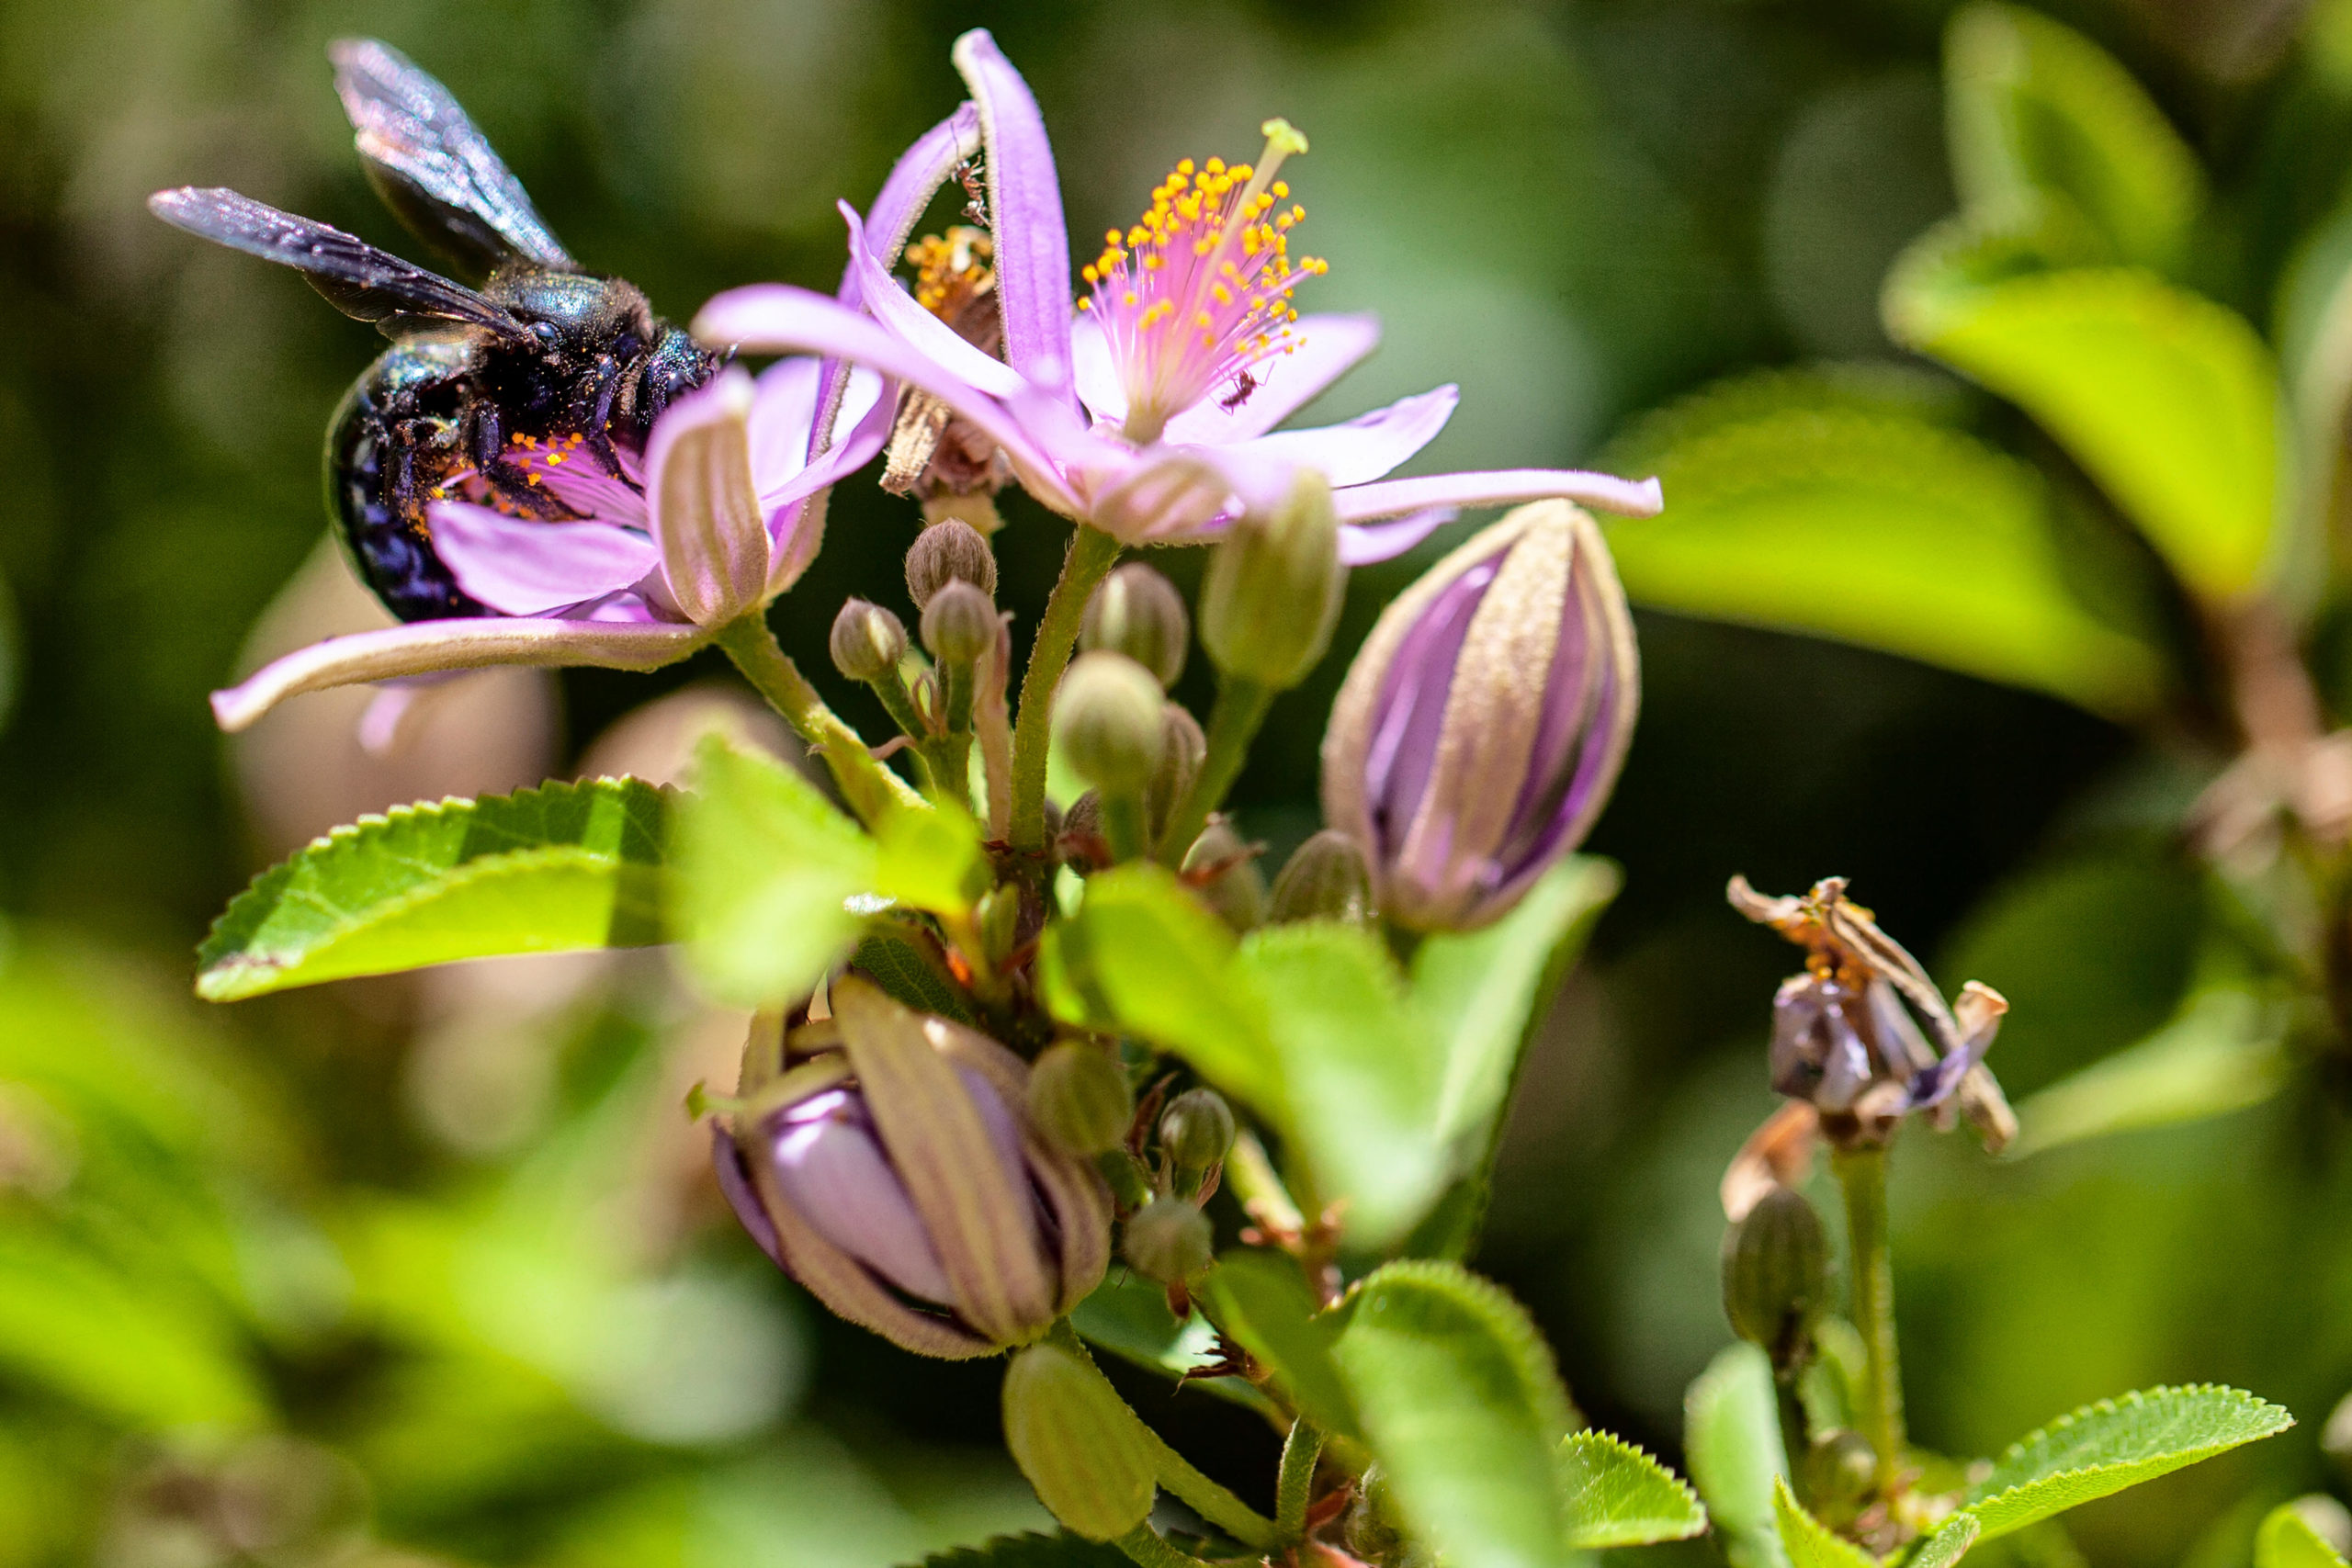 A carpenter bee collecting nectar, and pollen (Image: Enzo Nguyen / Alamy)